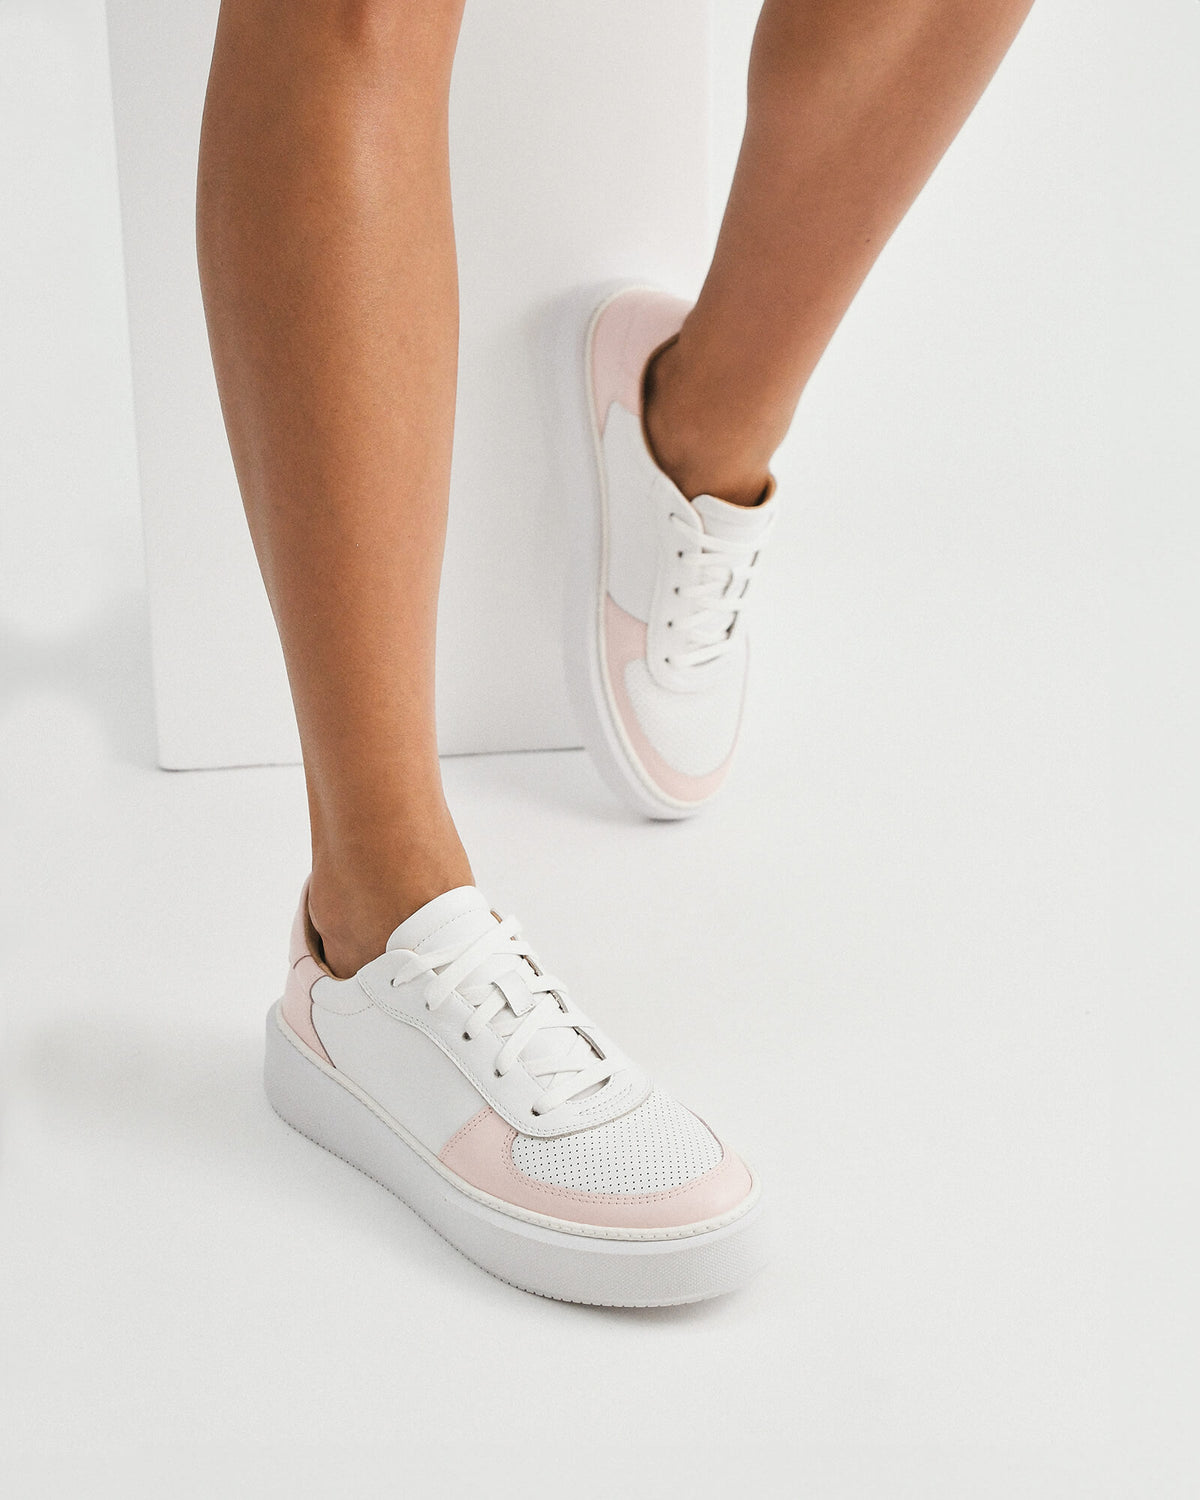 OTTO SNEAKERS WHITE SOFT PINK LEATHER